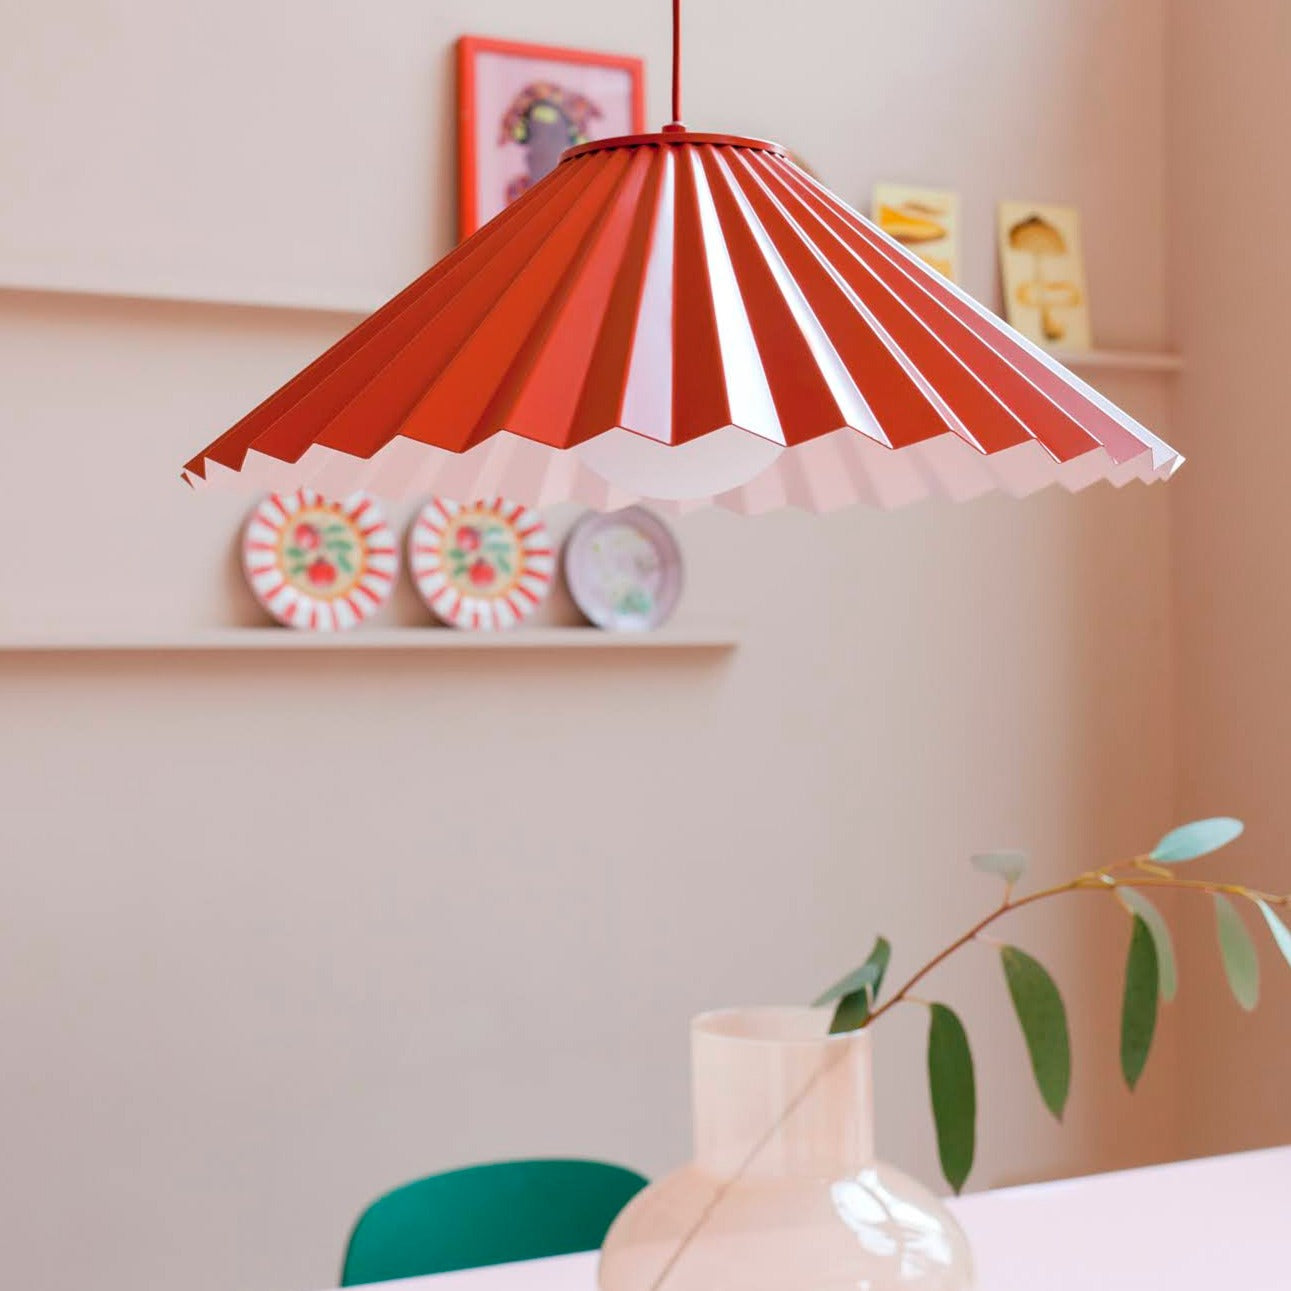 Houseof Pleat Pendant Ceiling Light designed by Emma Gurner, lifestyle detail. Available from someday designs.